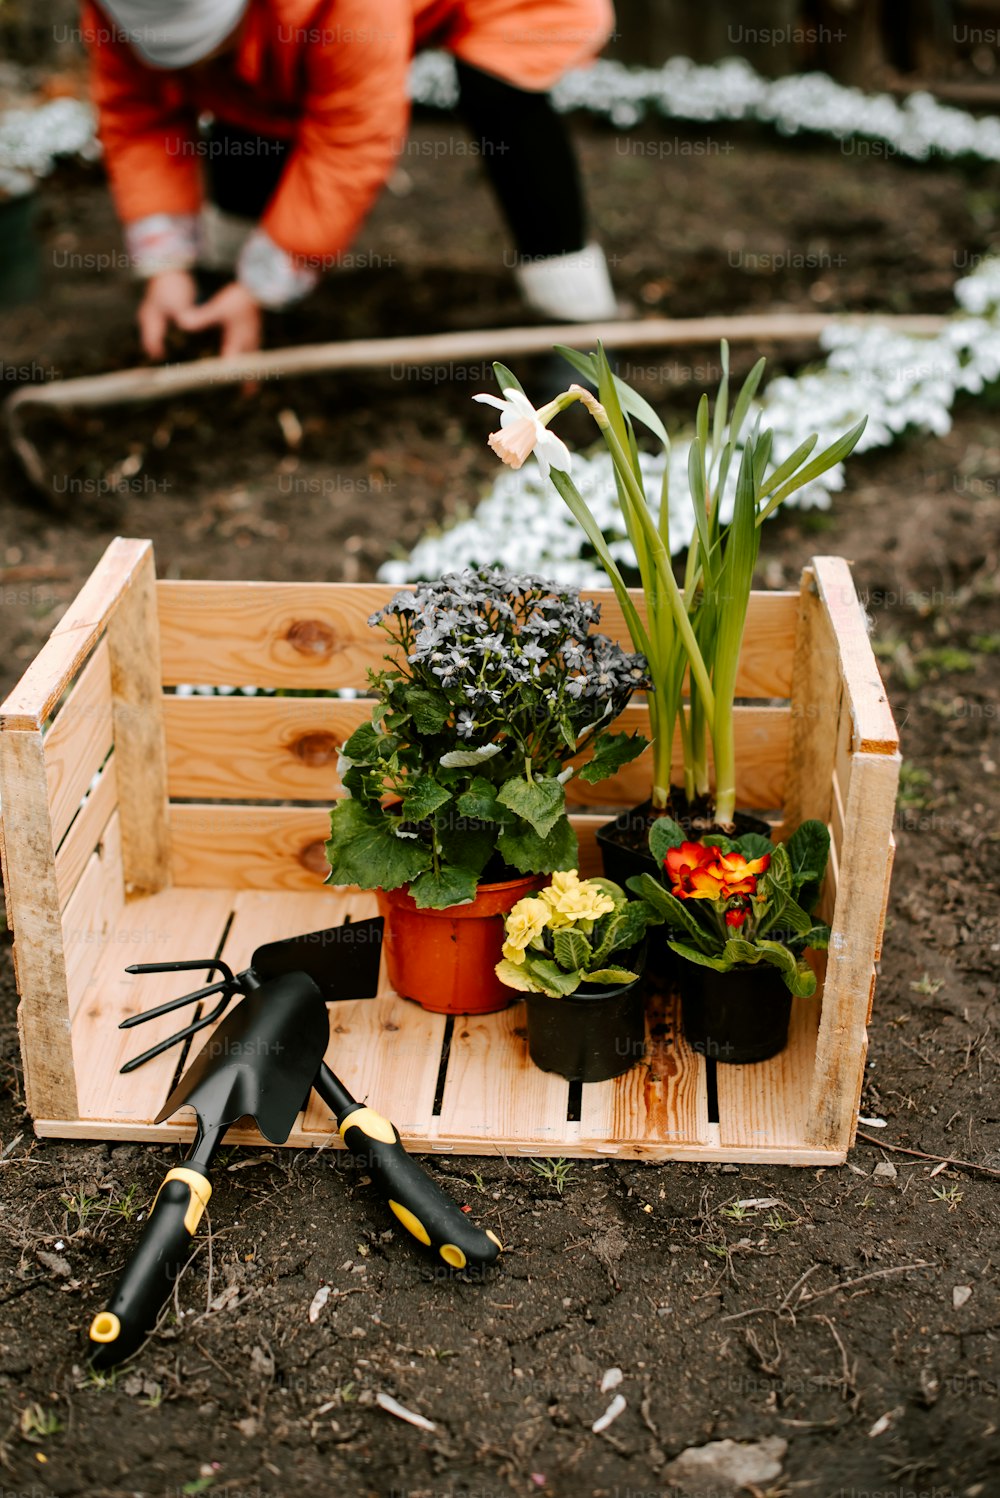 a wooden crate filled with plants and gardening tools